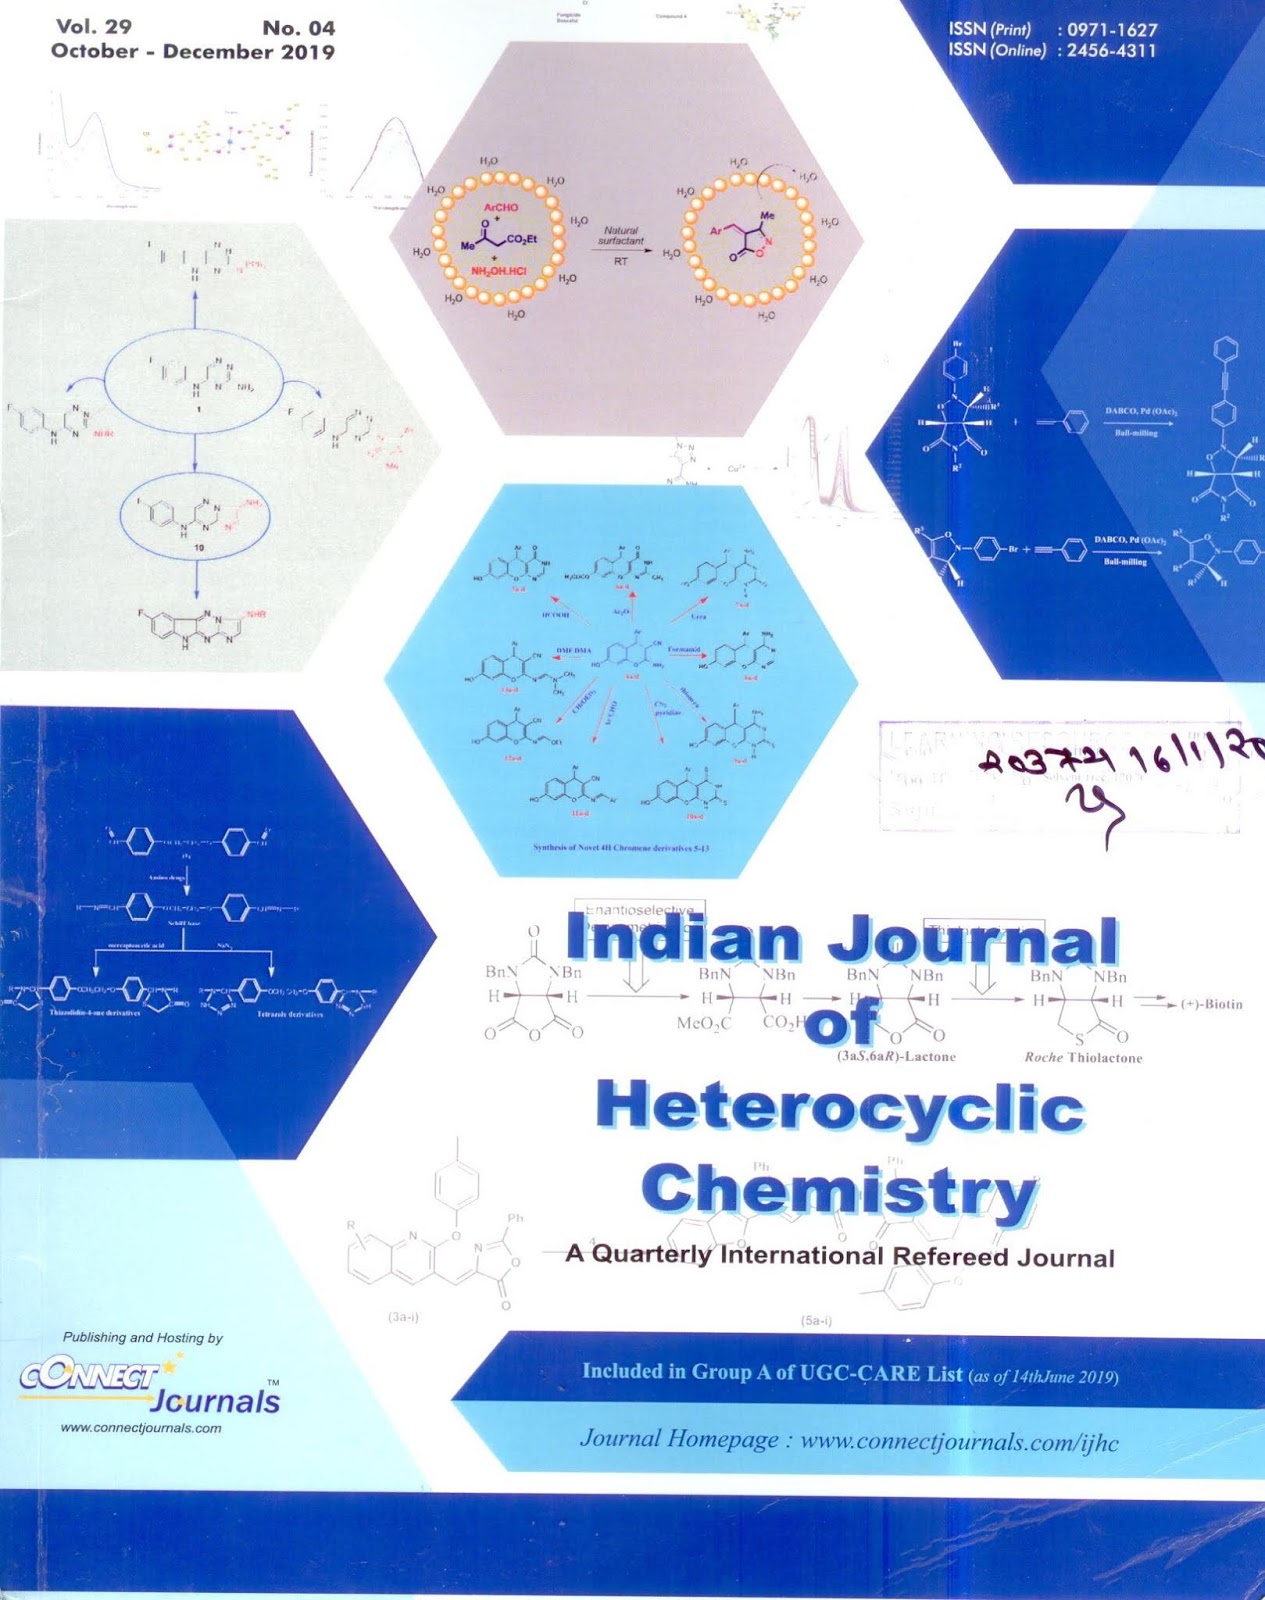 http://www.connectjournals.com/toc.php?bookmark=CJ-001644&&%20volume=29&&%20issue_id=04&&%20issue_month=Oct-Dec&&year=2019